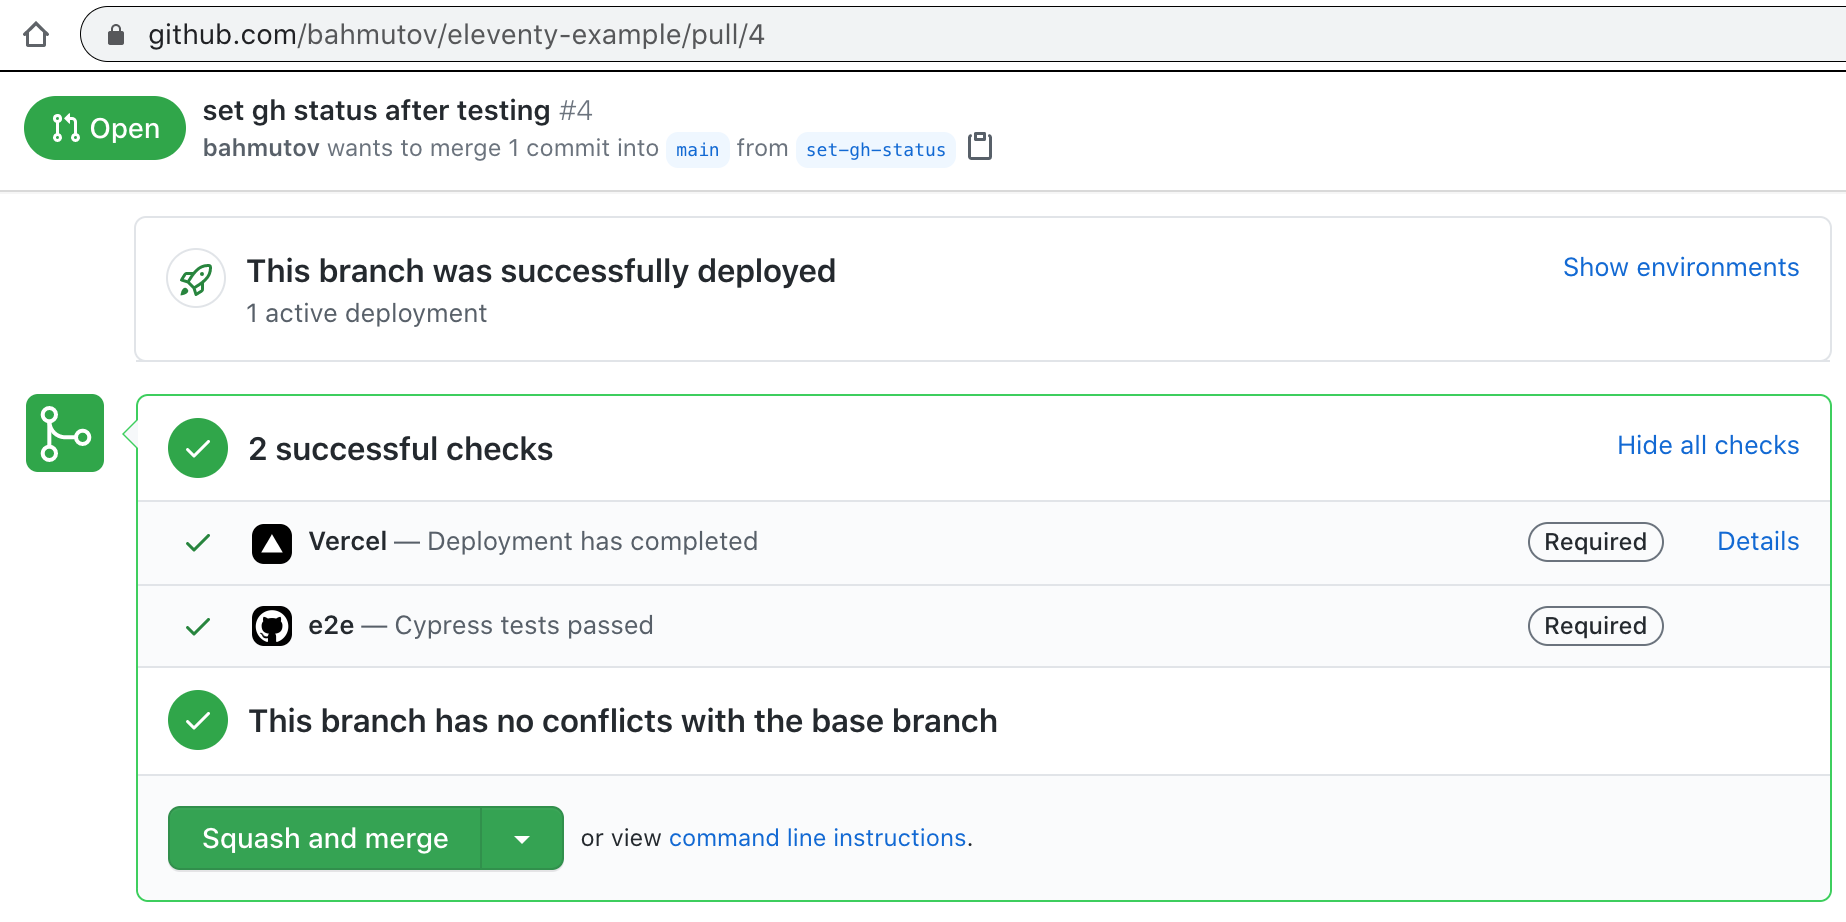 Posted commit checks